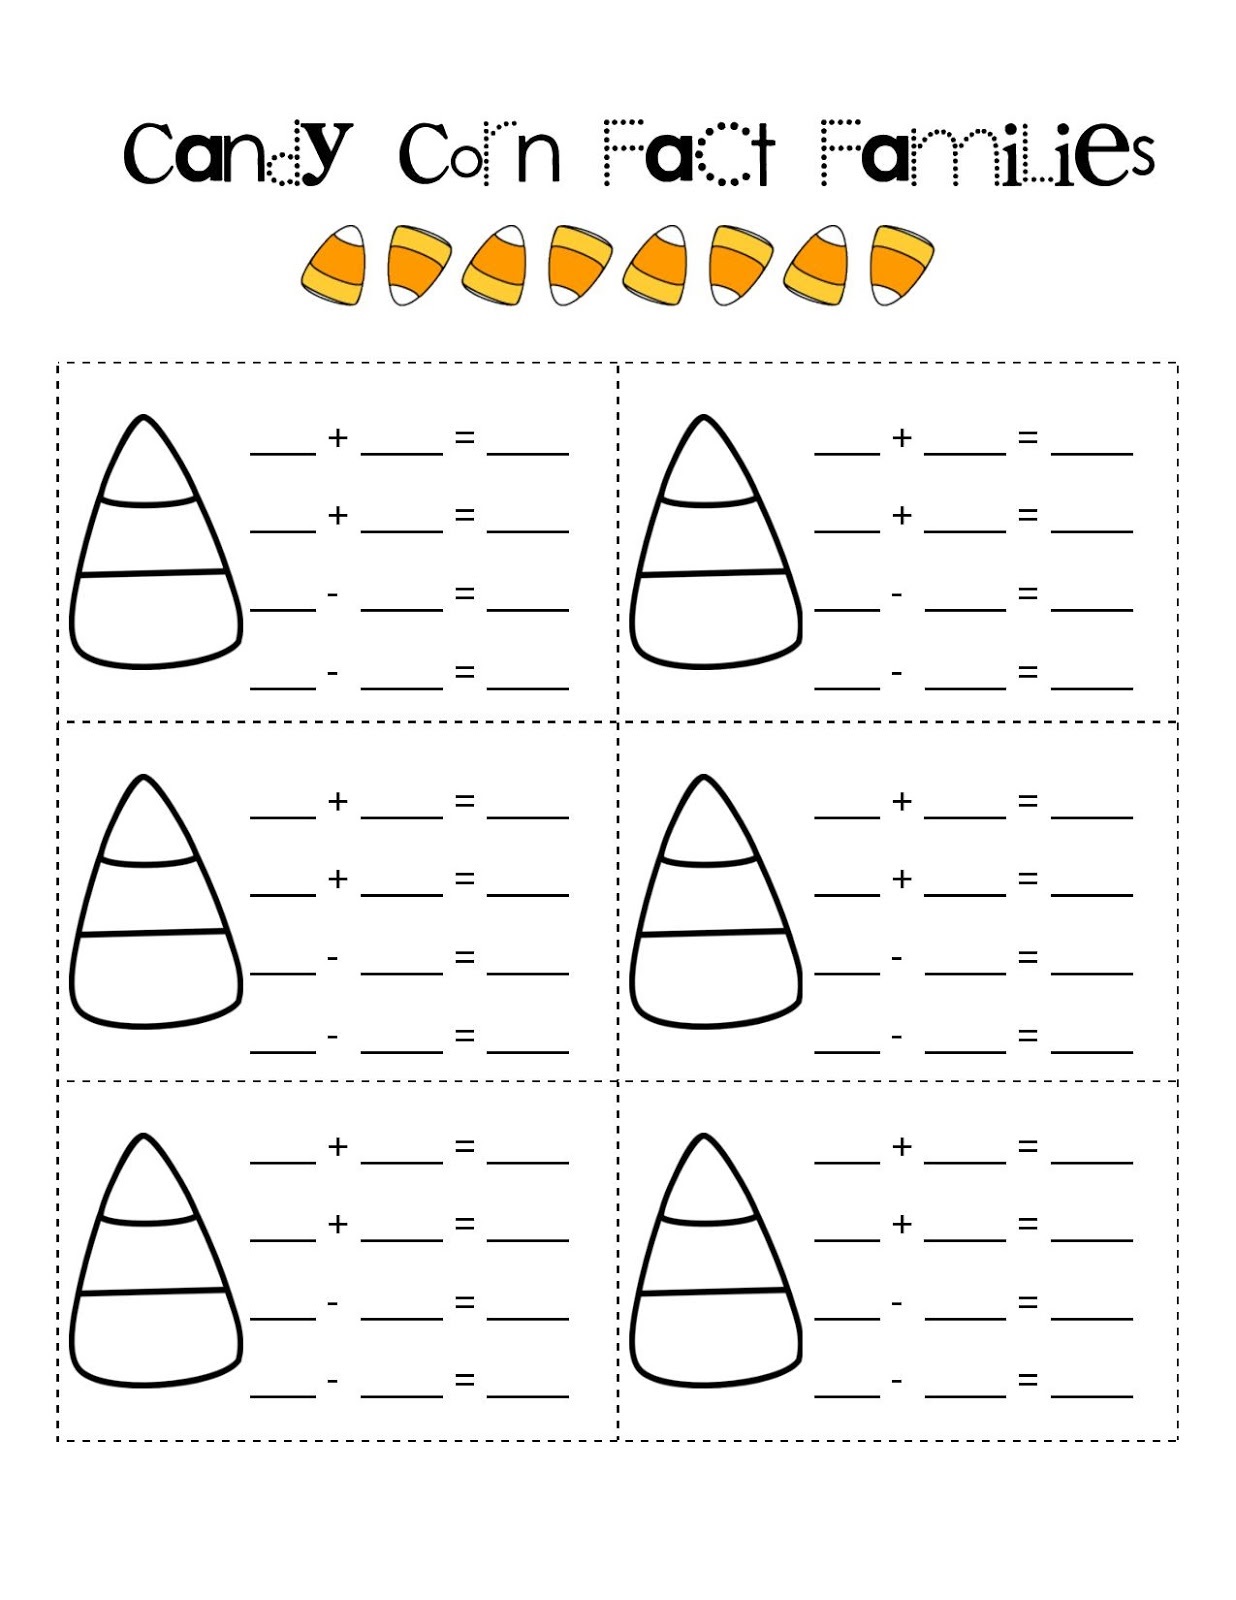 family-facts-worksheets-candy